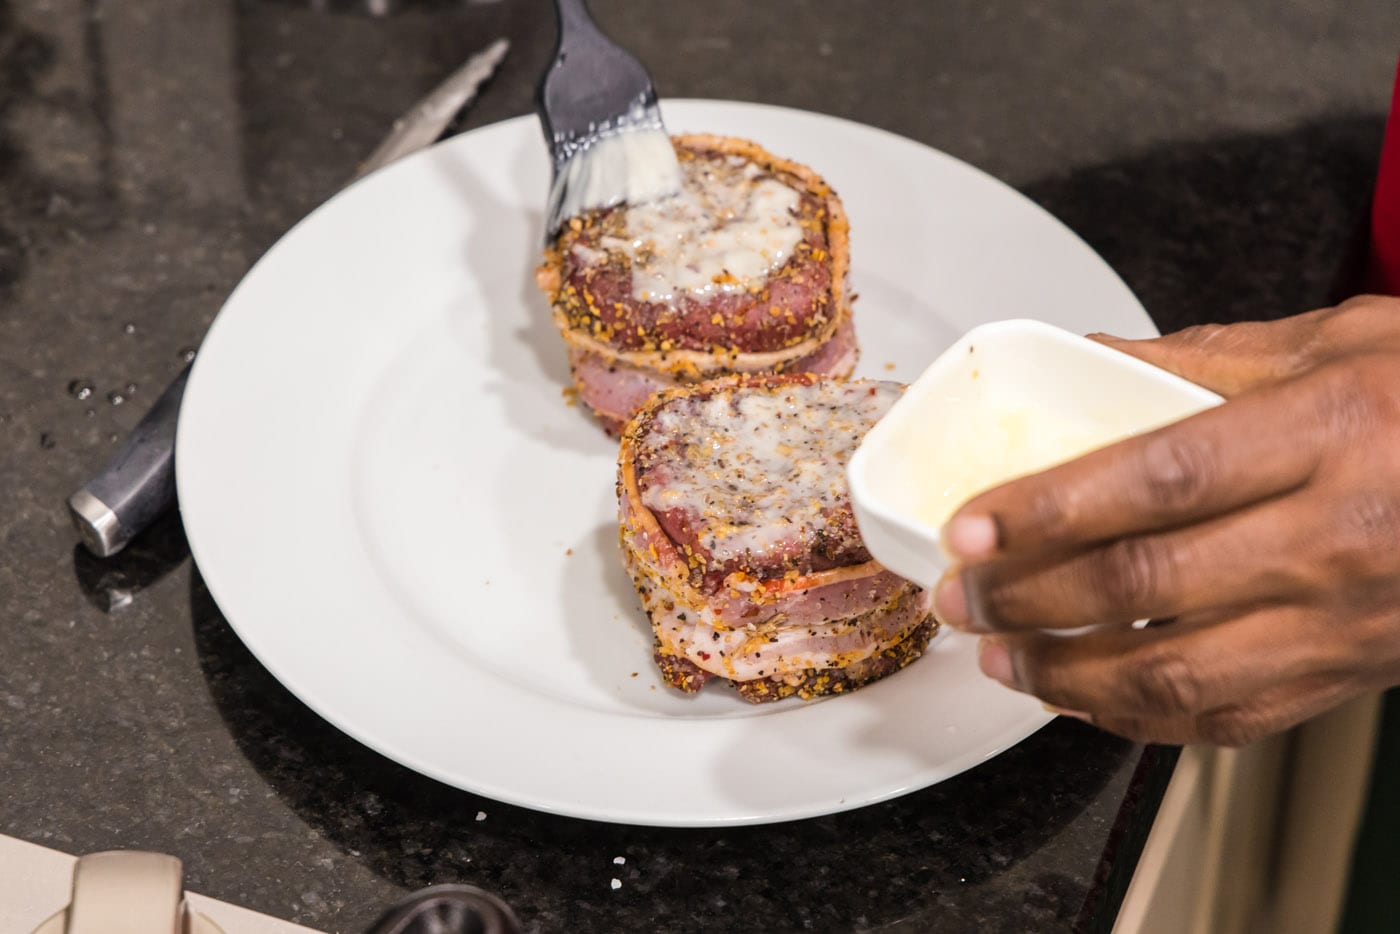 brushing filet mignon with butter